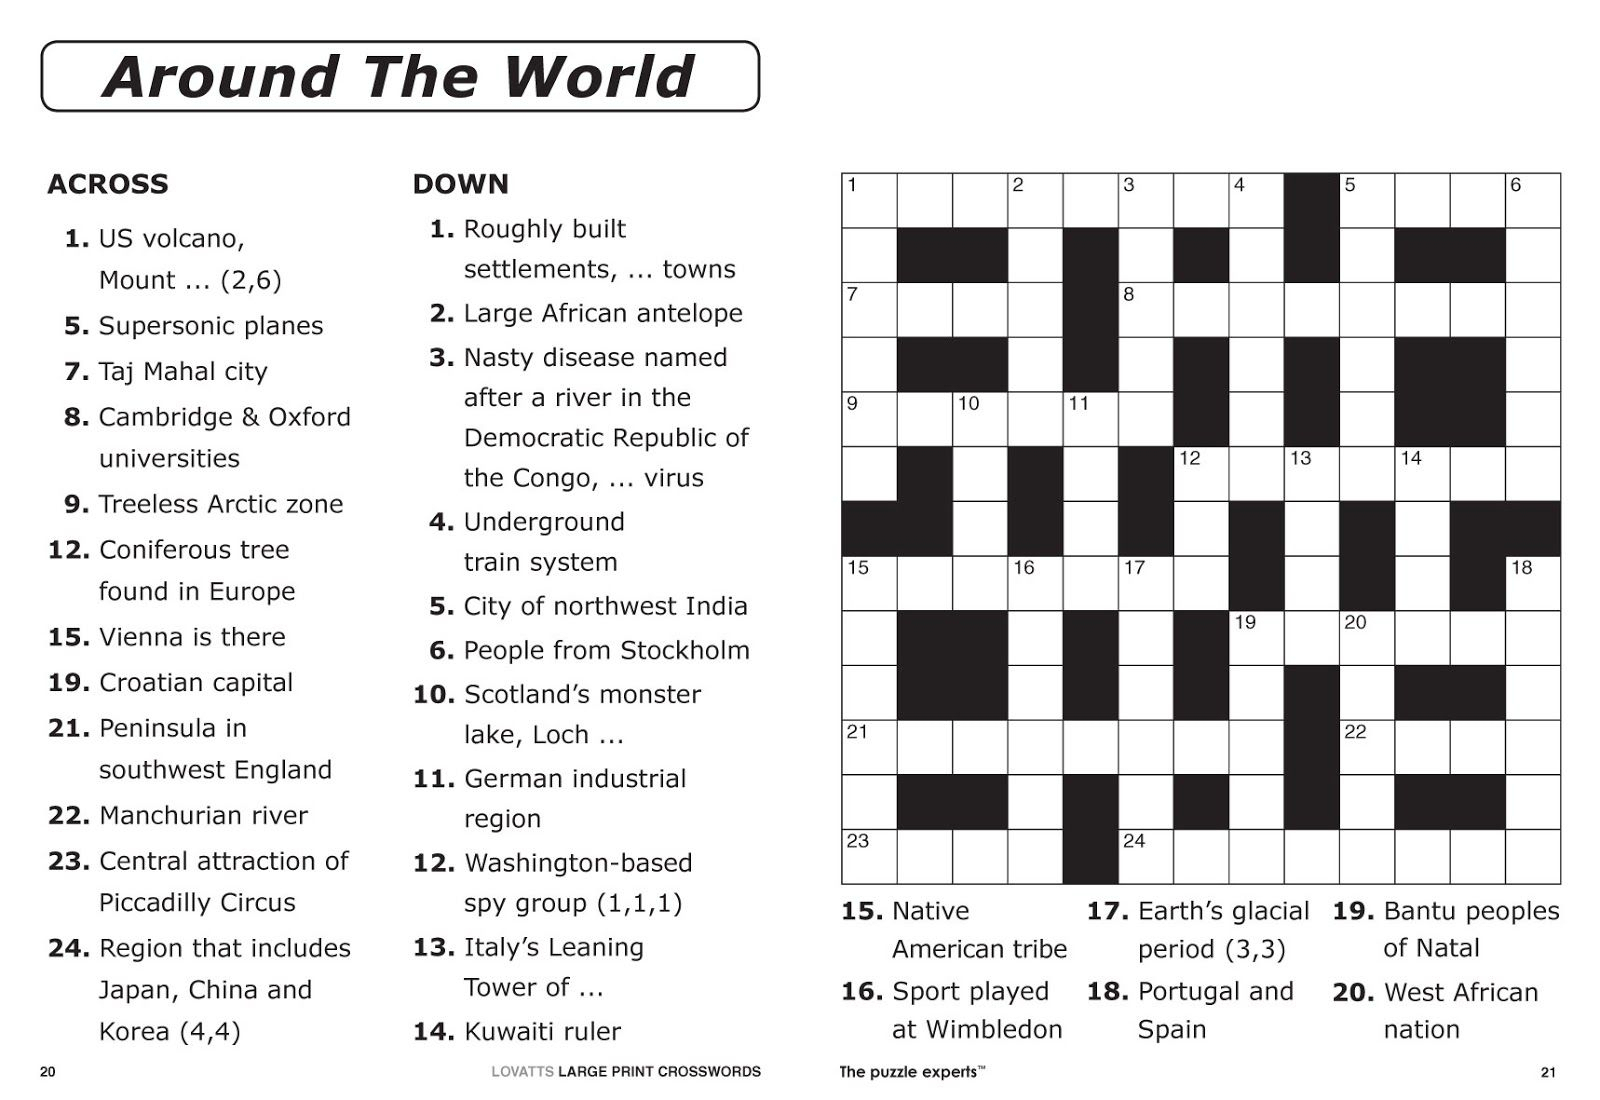 Free Printable Large Print Crossword Puzzles | M3U8 - Printable Crosswords For Young Adults